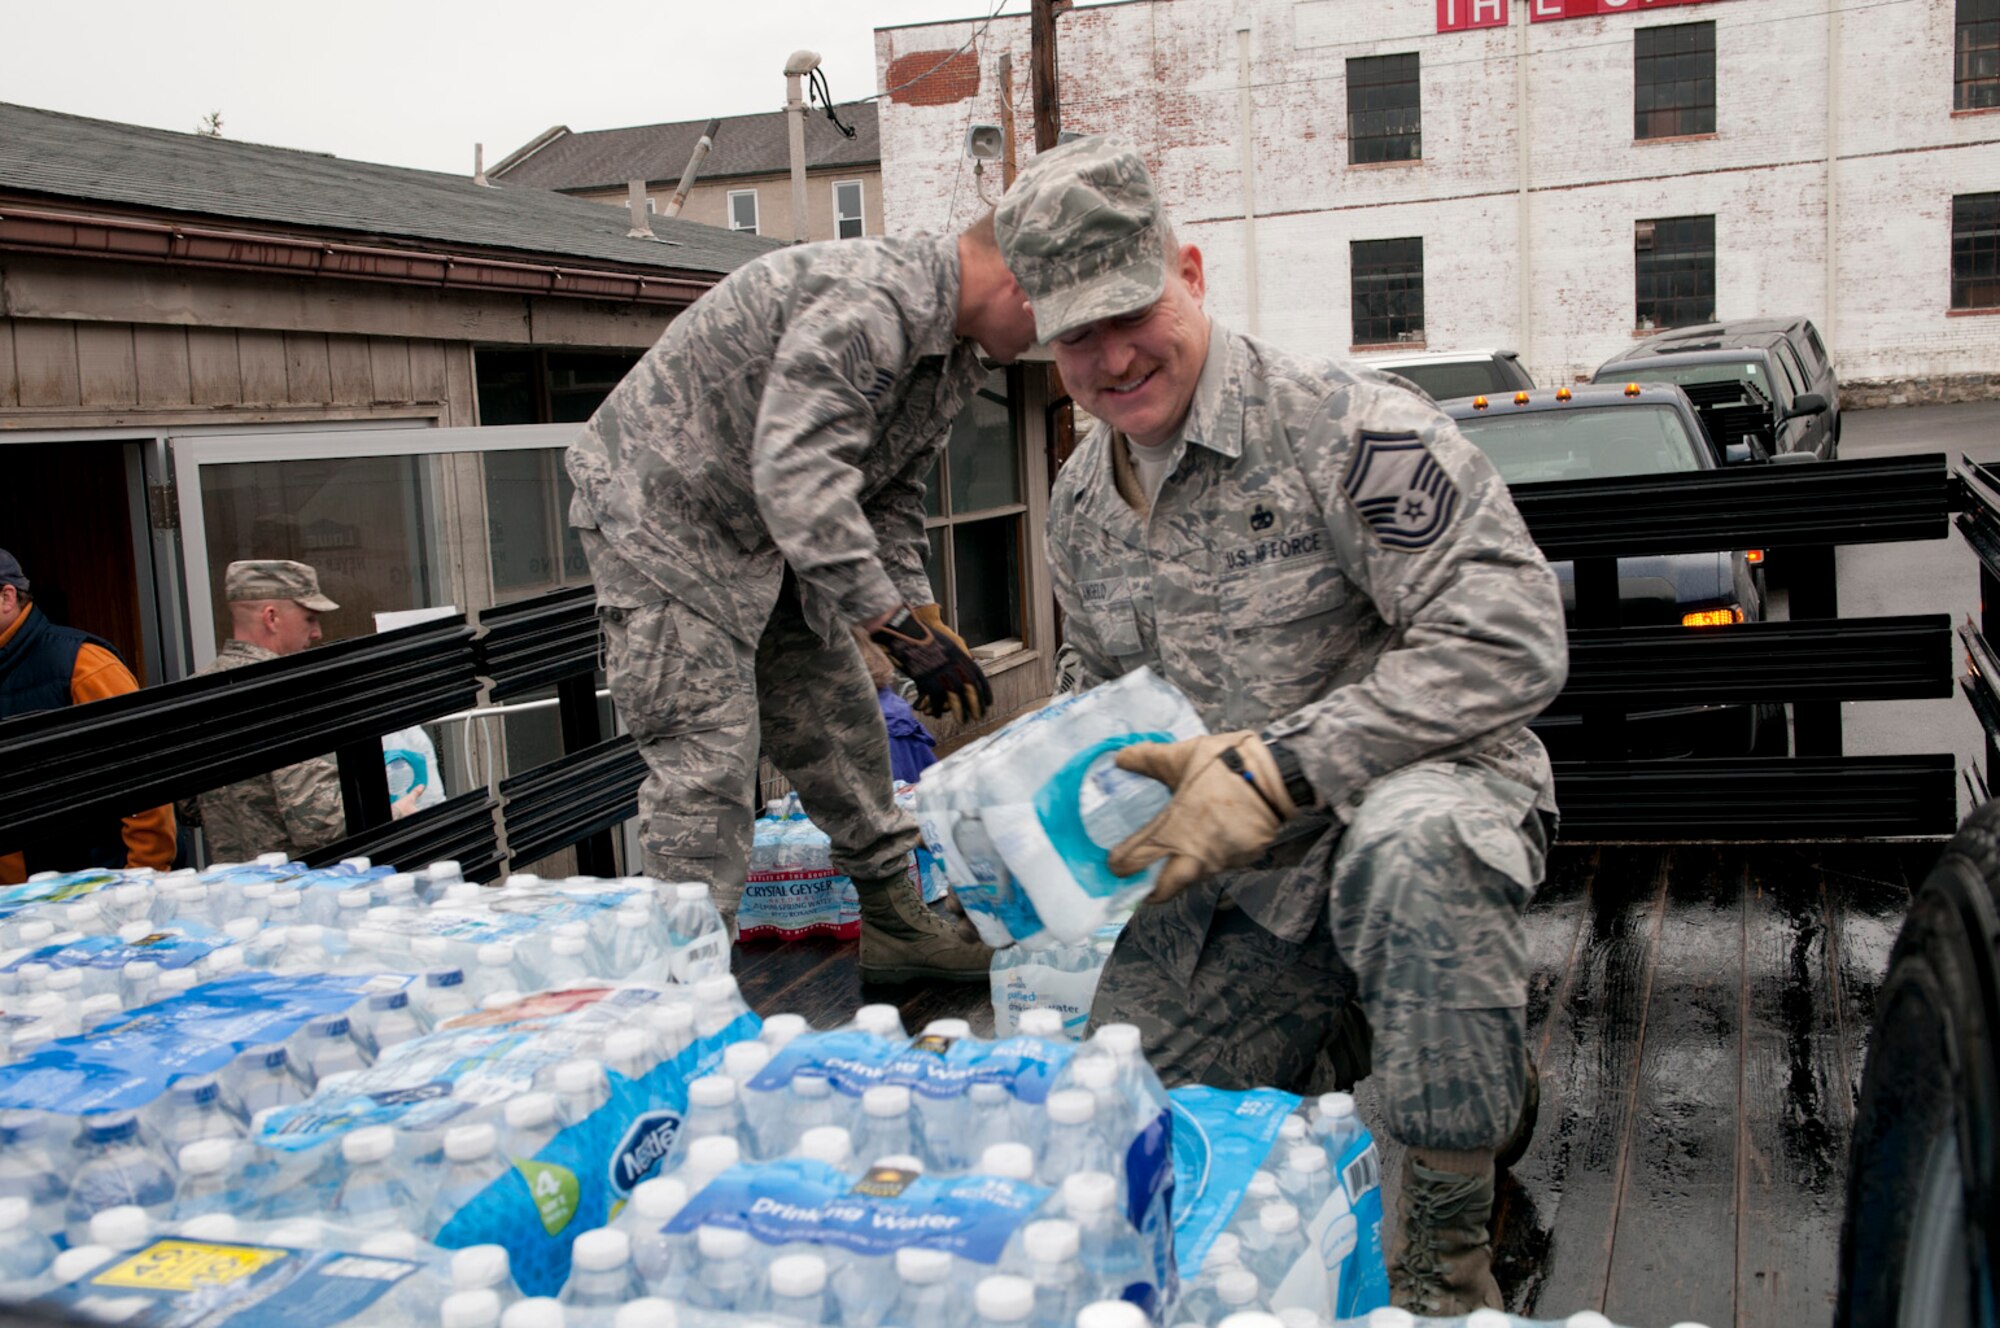 Airmen from the 167th Airlift Wing helped transport more than 60,000 pounds of donated supplies to Charleston, W.Va. for the 300,000 people left without drinking water in southern West Virginia. (Air National Guard photo by 2nd Lt. Stacy Gault)